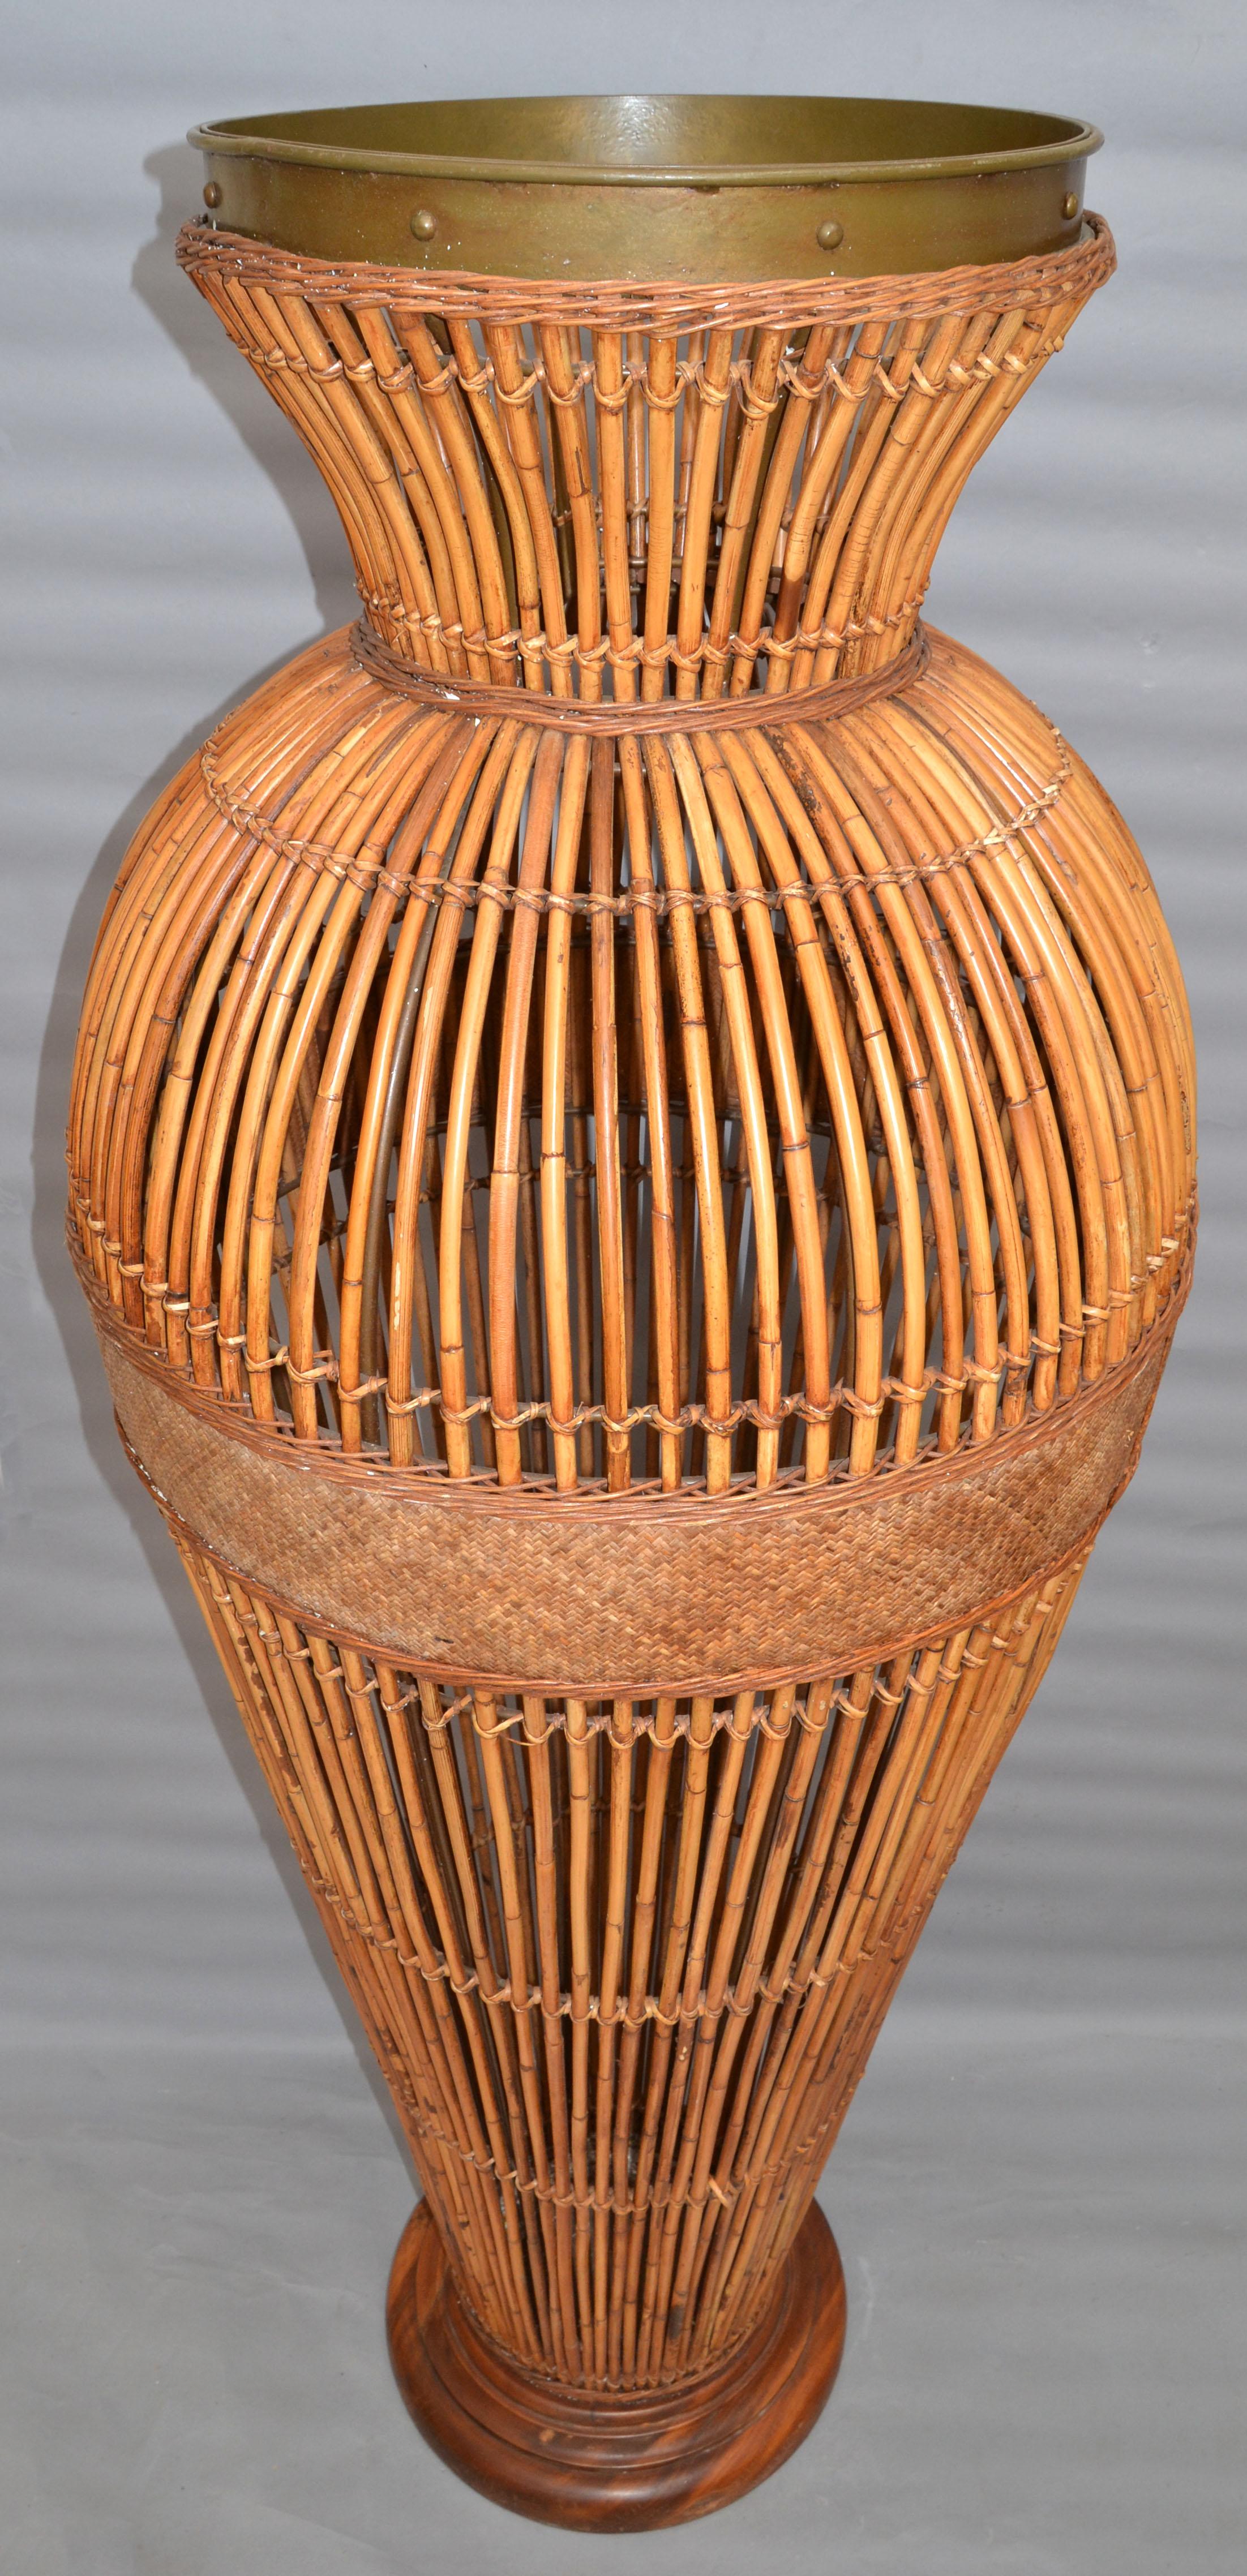 Huge floor vase made out of bamboo, cane and brass Bohemian style and designed in the Mid-Century Modern period.
All handmade and would be great for a Lobby in a Hotel.
Coastal Outdoor and Indoor Garden Elements for Your Tropical Resort Setting.